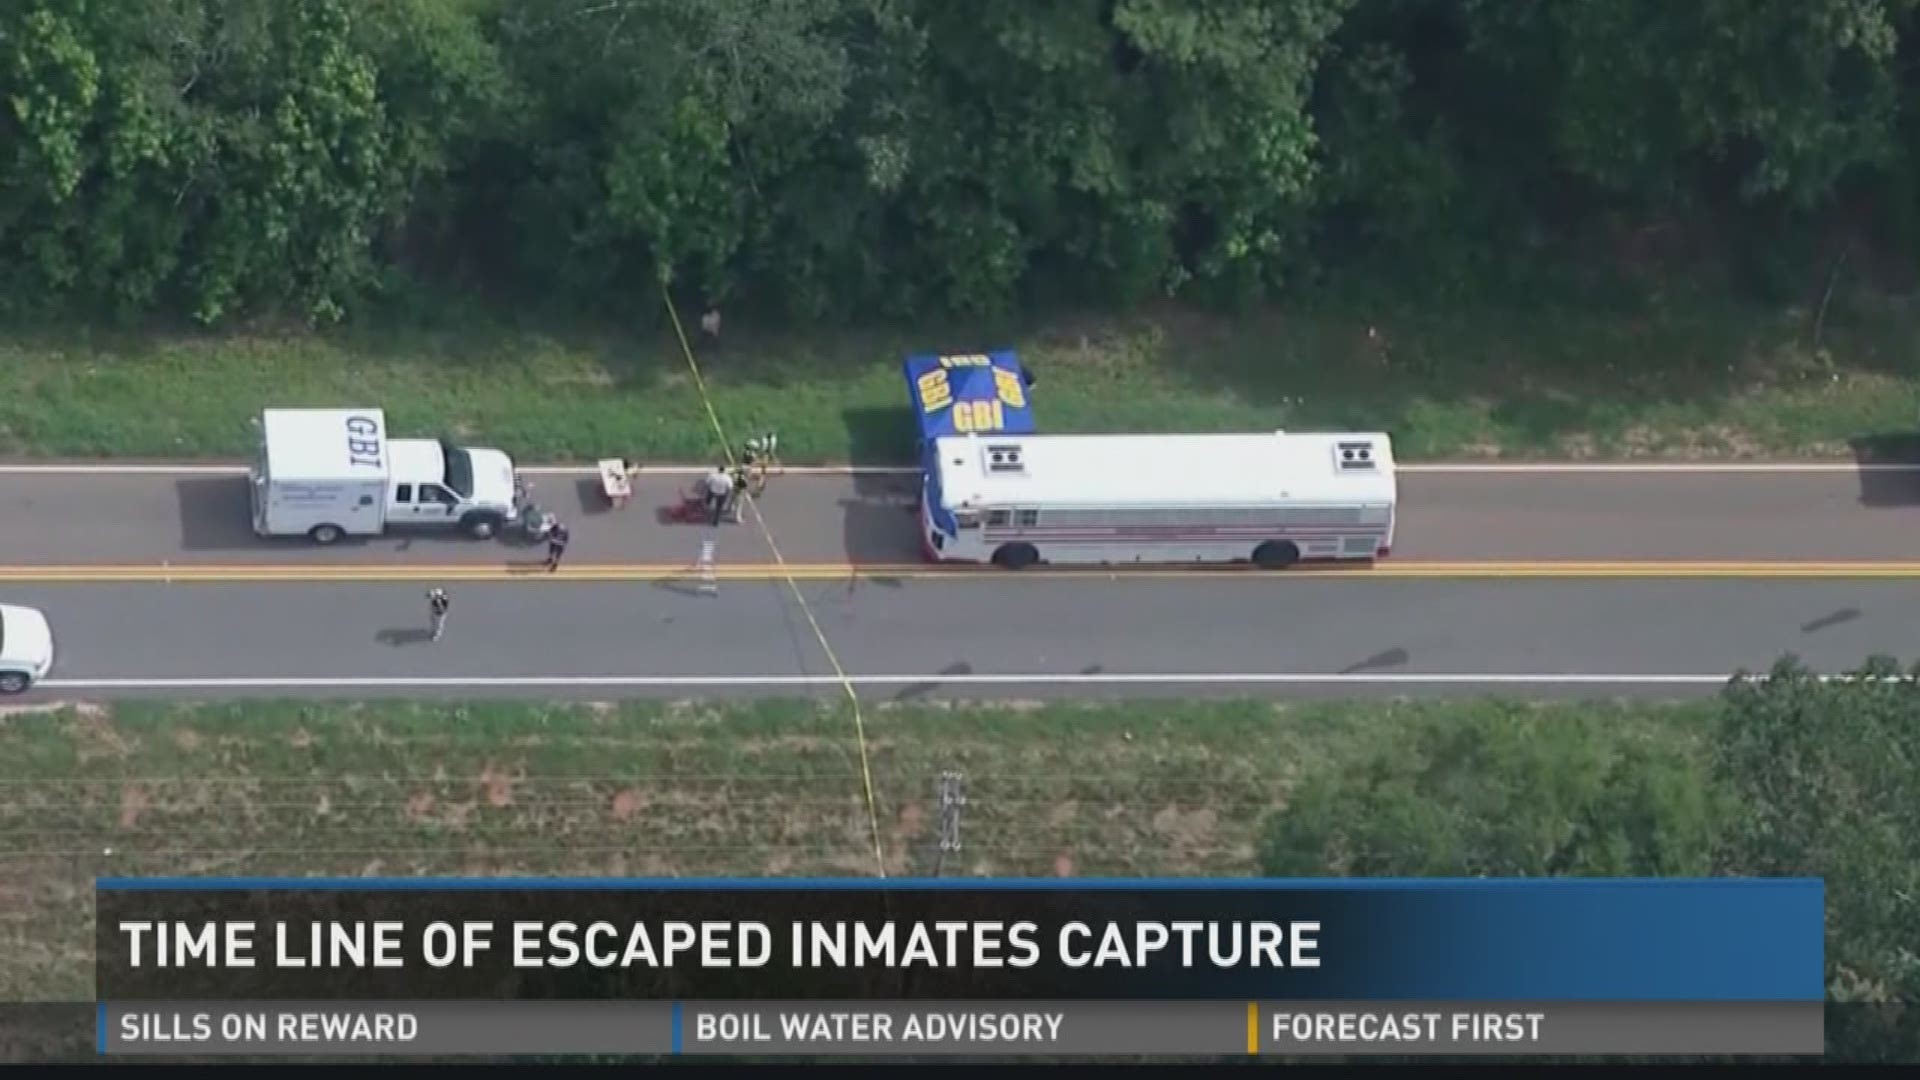 Timeline of escaped inmates capture